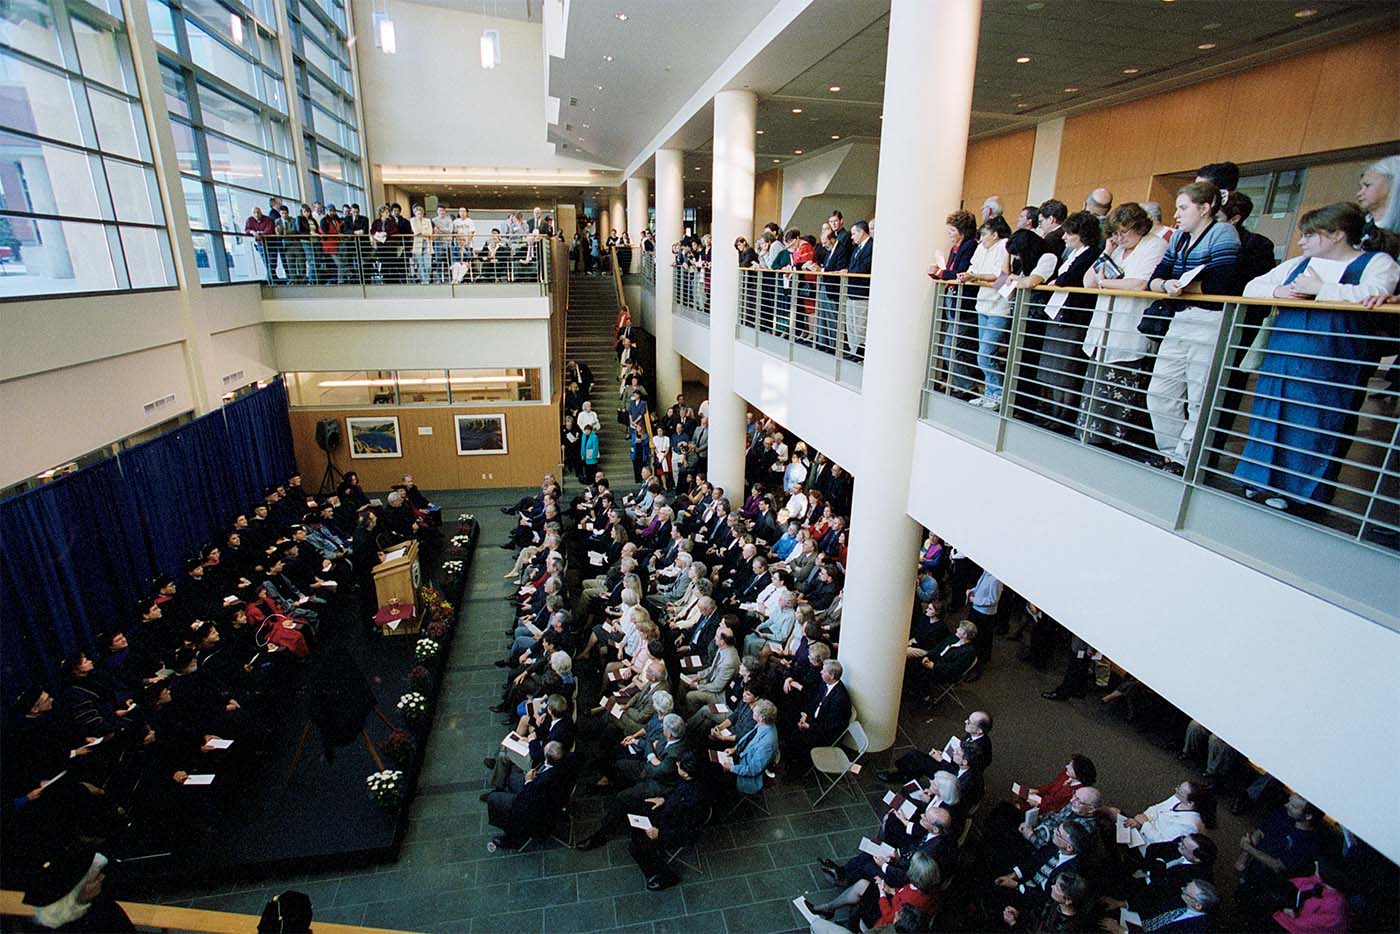 In October 1999, hundreds of guests, including alumni, donors, university leaders, and members of the legal community, join faculty and staff to formally dedicate Sullivan Hall, named after former Seattle U President William J. Sullivan, S.J.